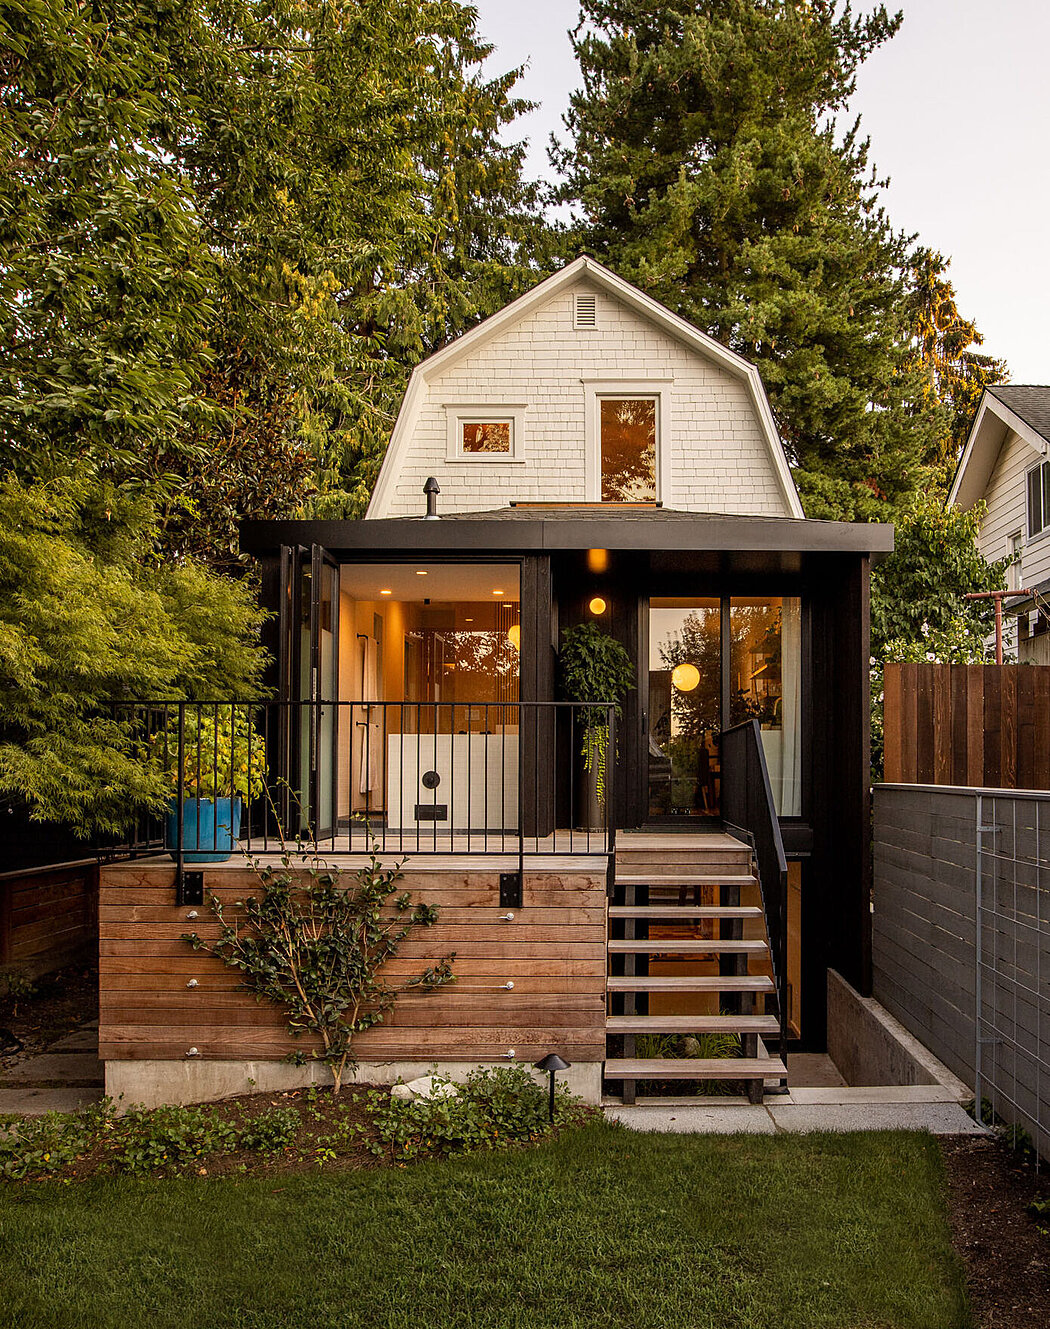 Phinney Mini: A Charming Reimagined Two-Story Home - 1